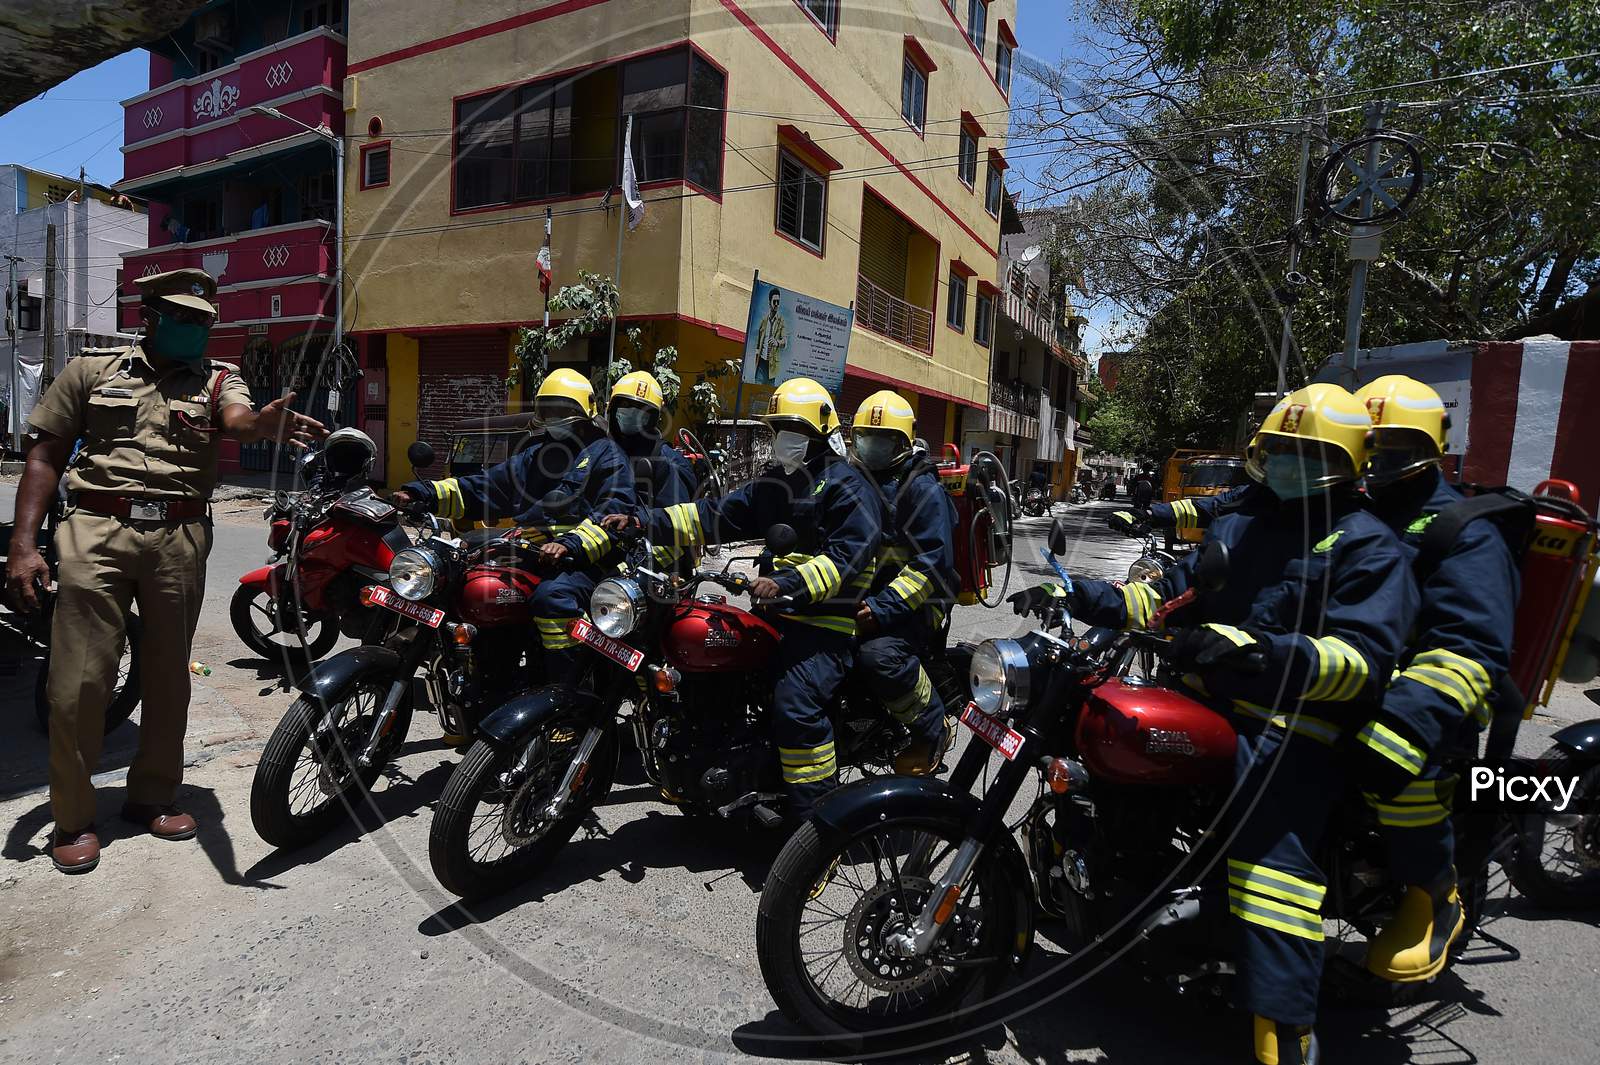 Firefighters on motorbikes equipped with disinfectants getting instructions from a police officer in a containment zone during the lockdown in Chennai